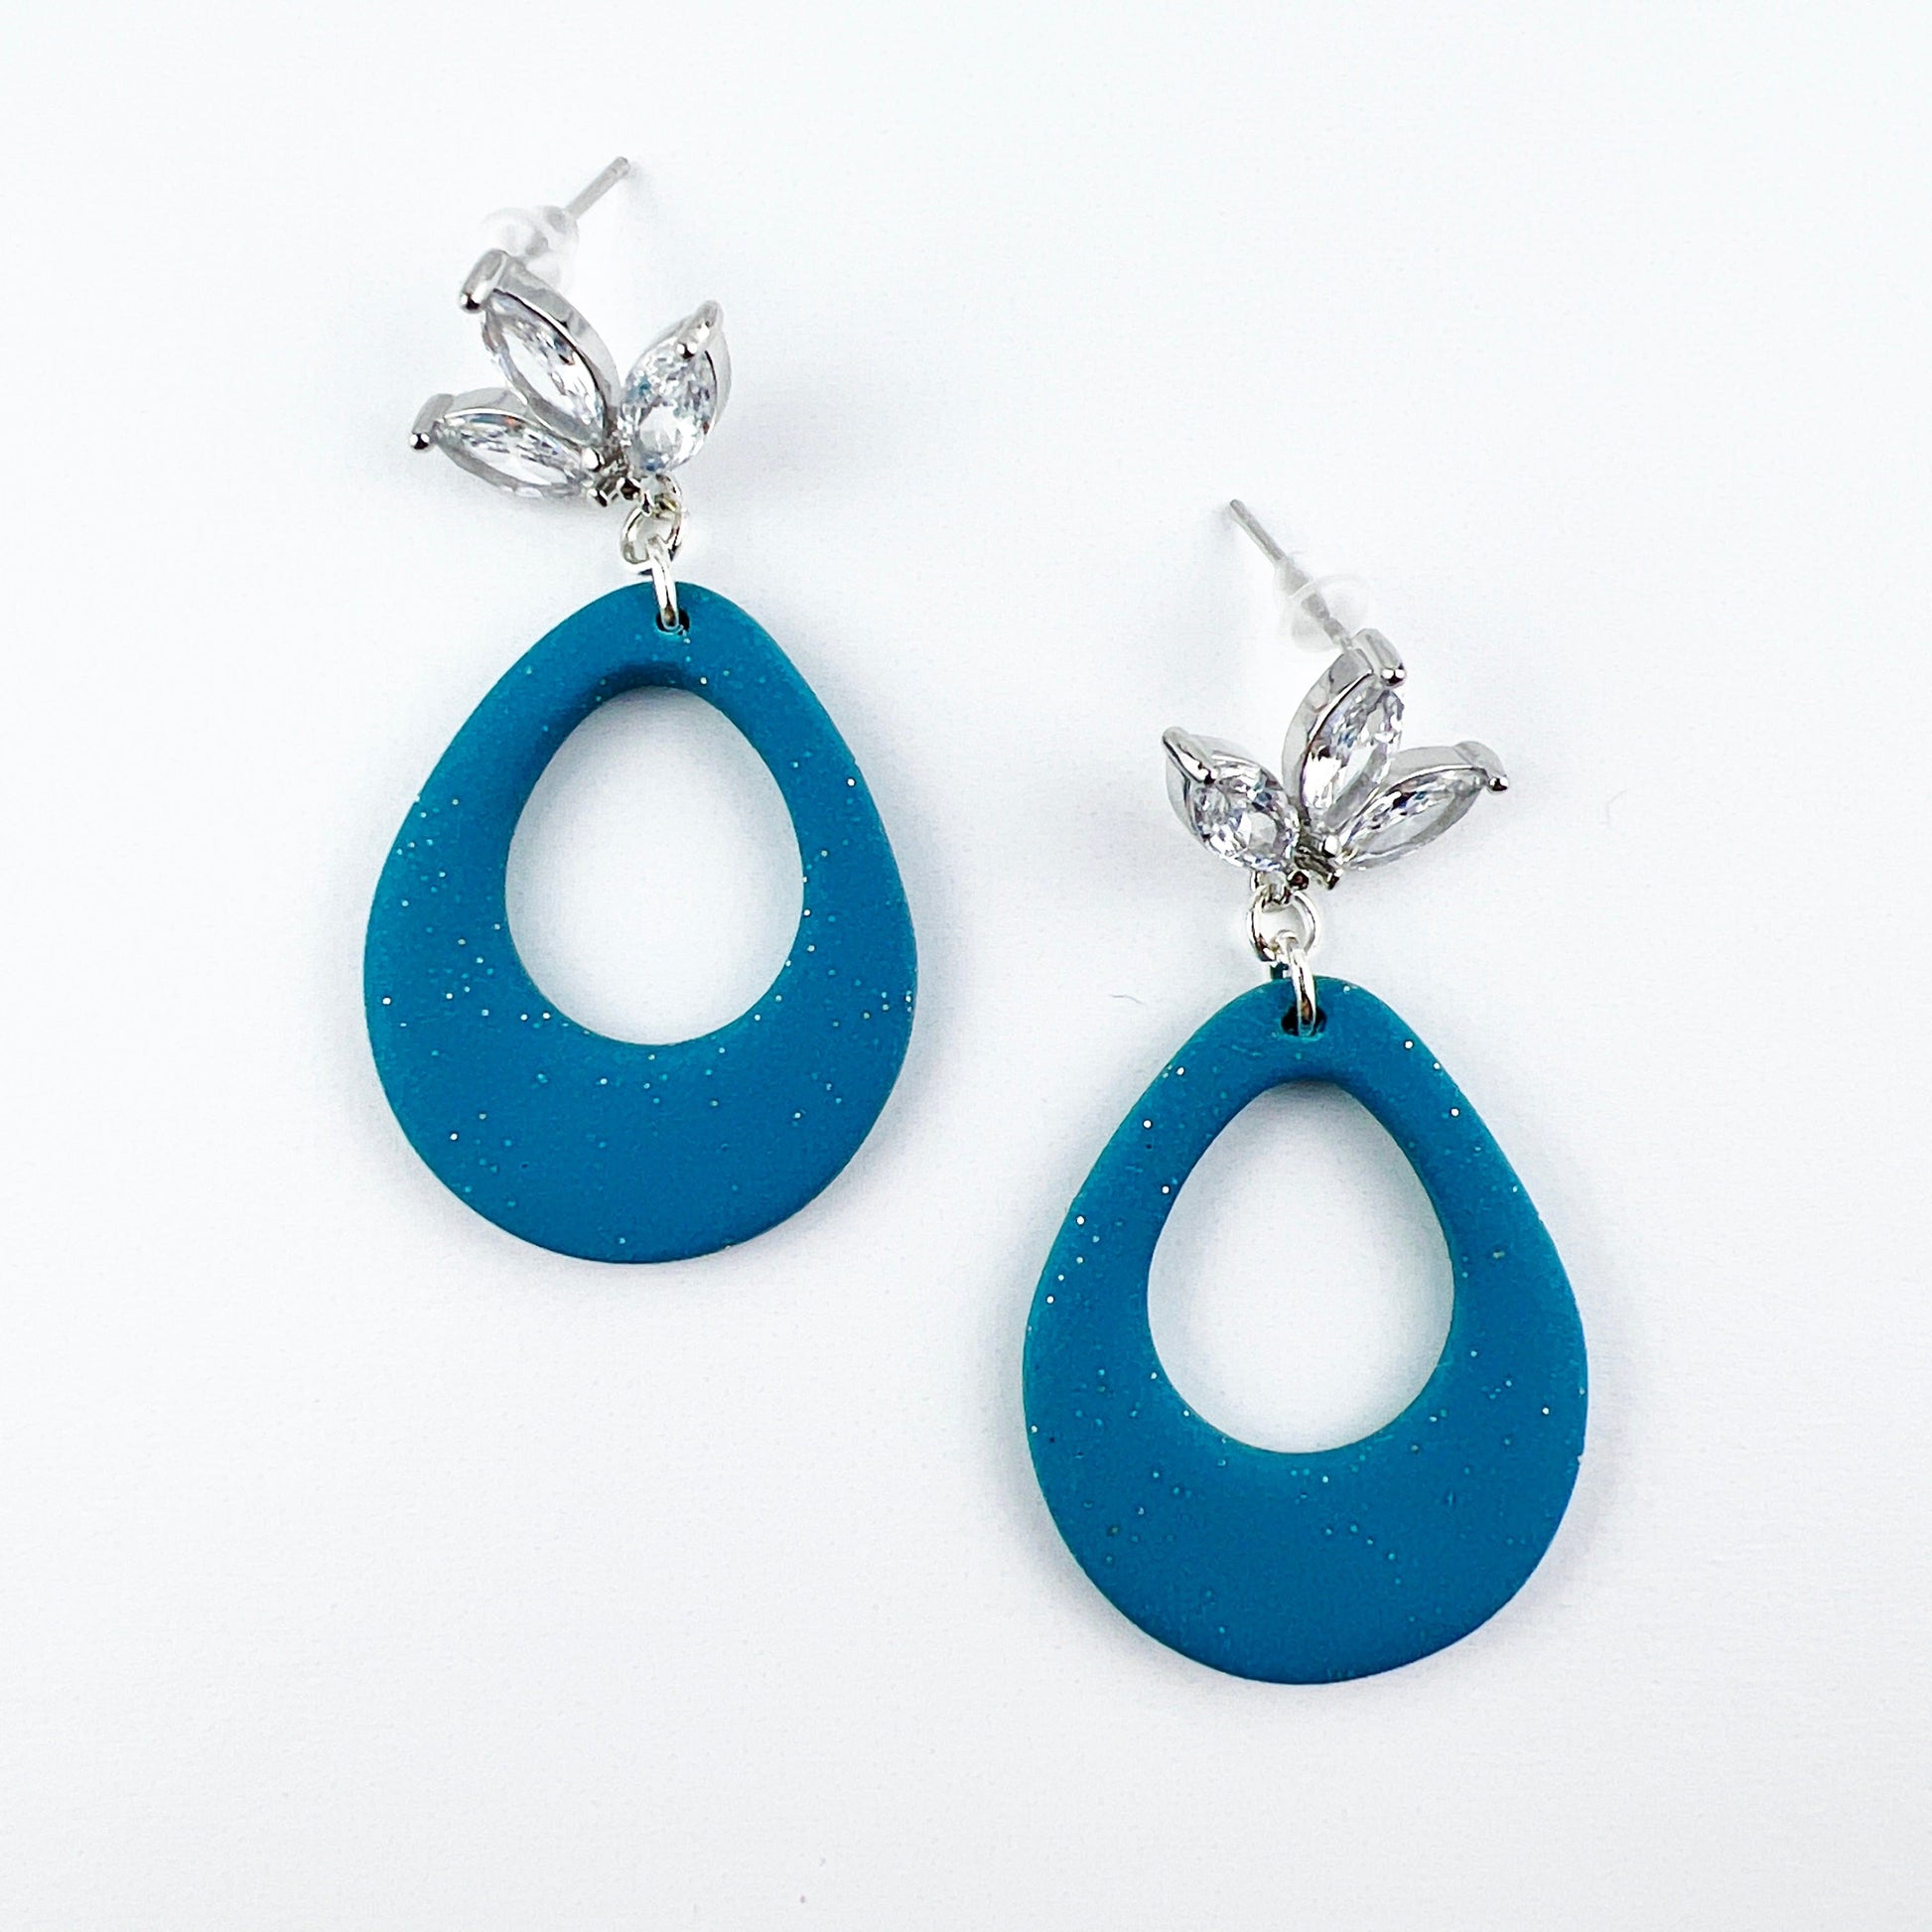 Earrings Kisa - Shimmering Turquoise Teardrop with Floral Cubic Zirconia Posts